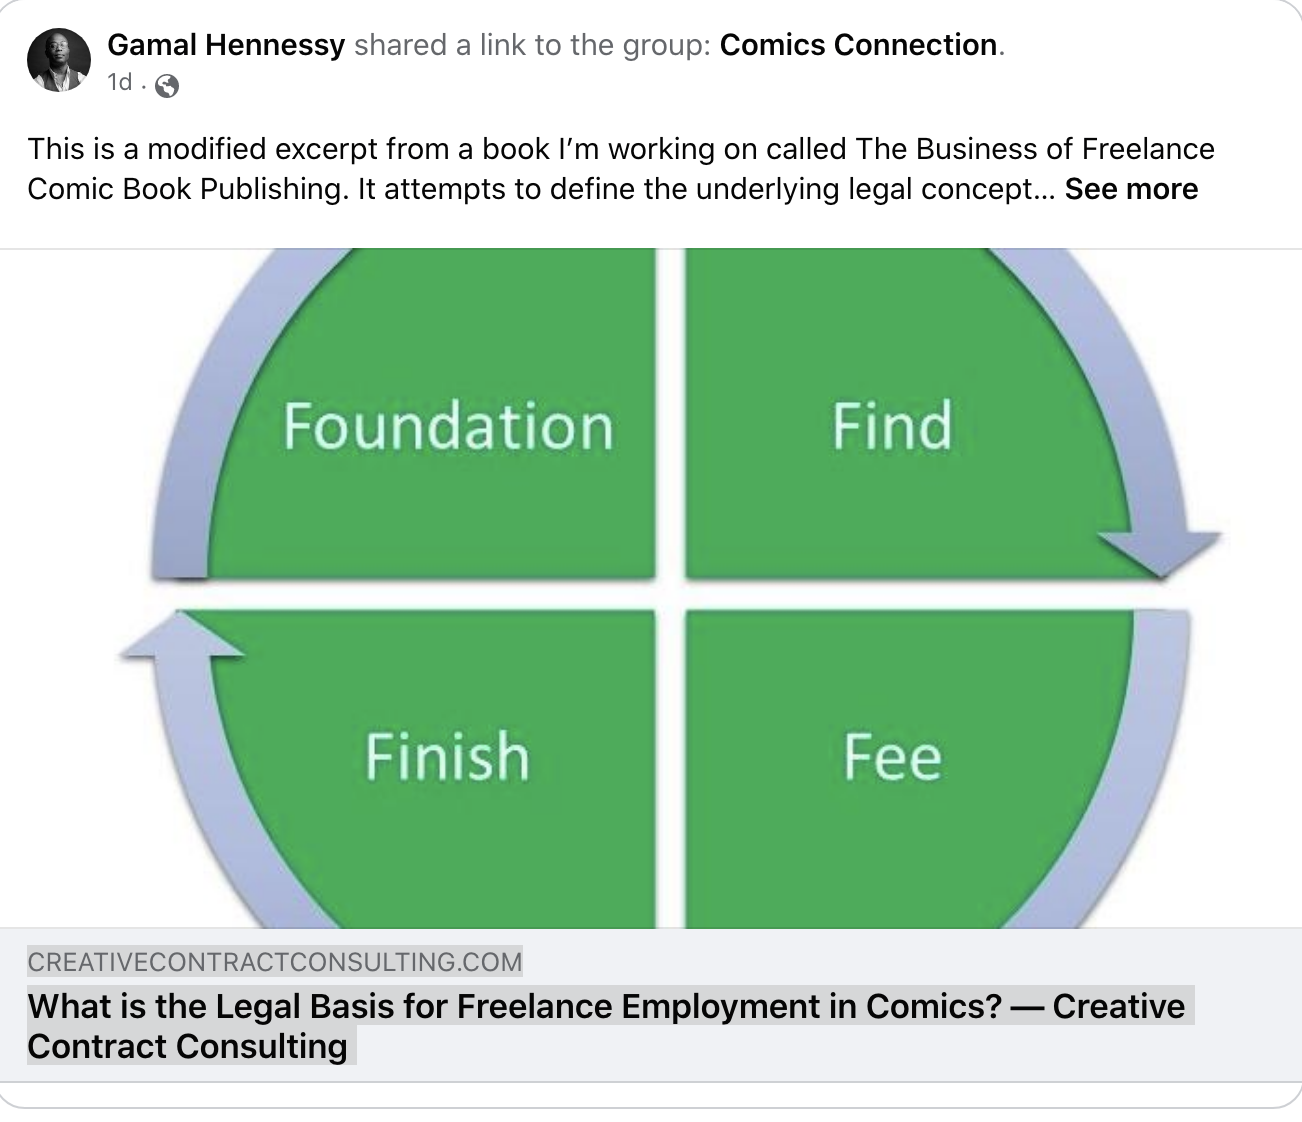 NOW THIS: From C3-What Is The Legal Basis For Freelance Employment In Comics?